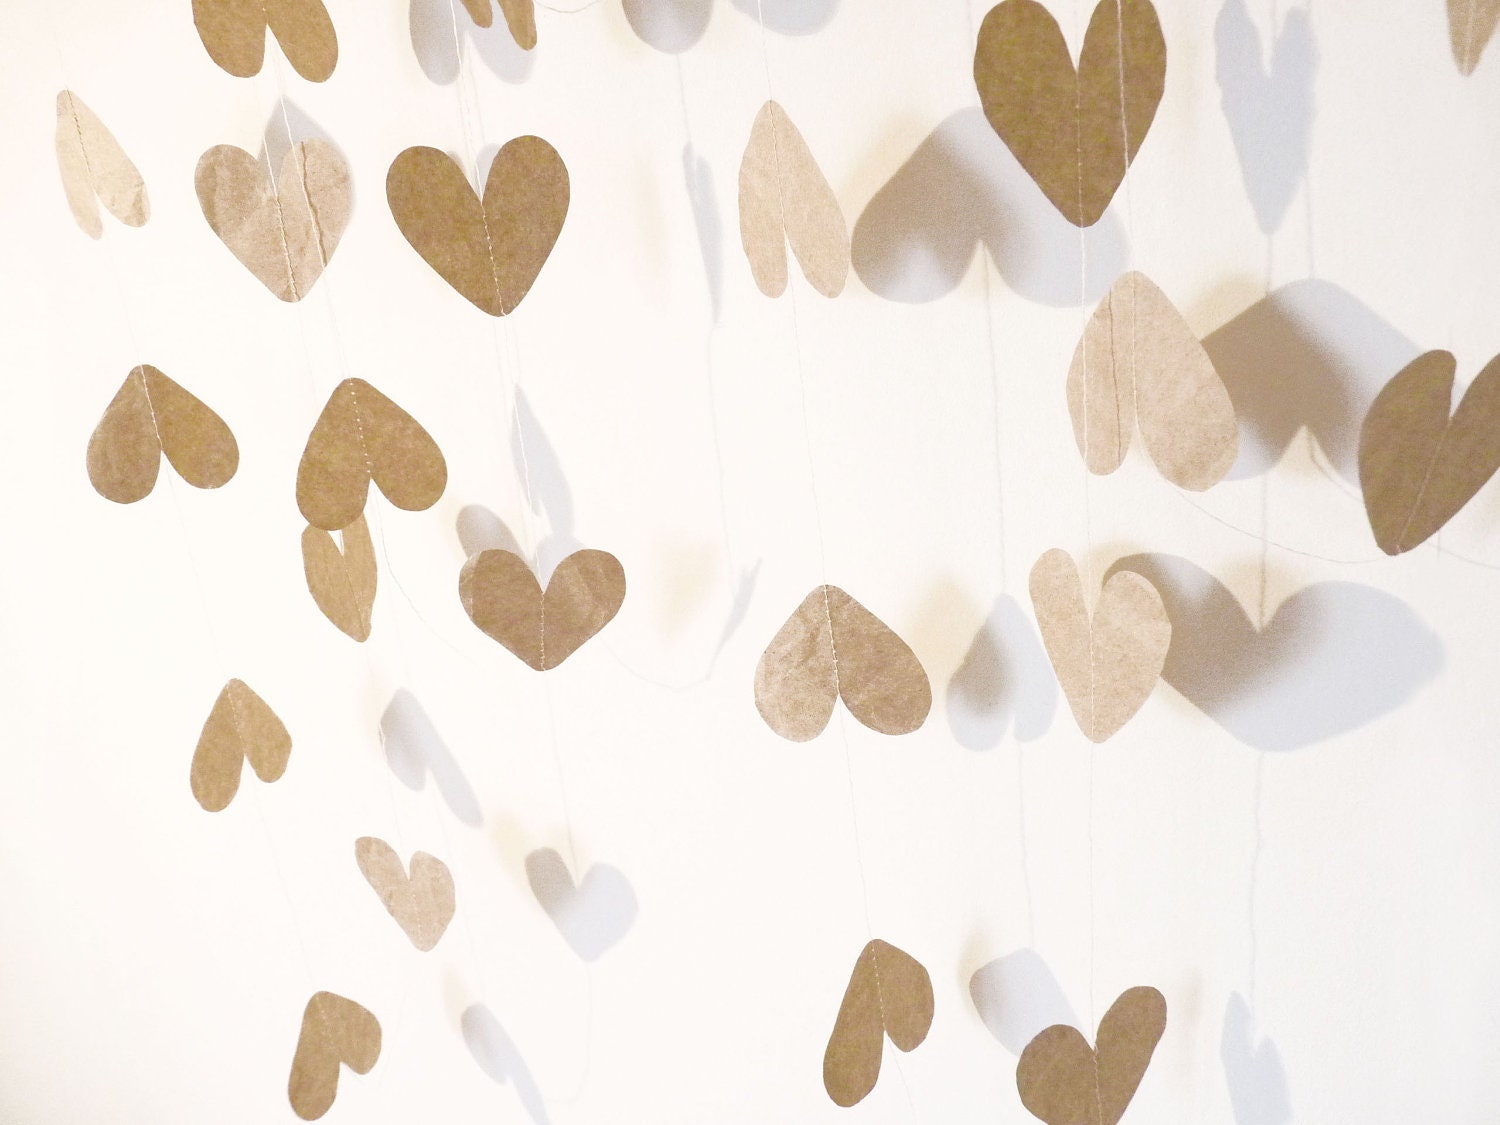 Recycled Brown Paper Heart Garland / First Anniversary Gift / Contemporary Christmas Decoration (Approx 2.68 meters / 8.7 feet) - HandmadebyKATuck